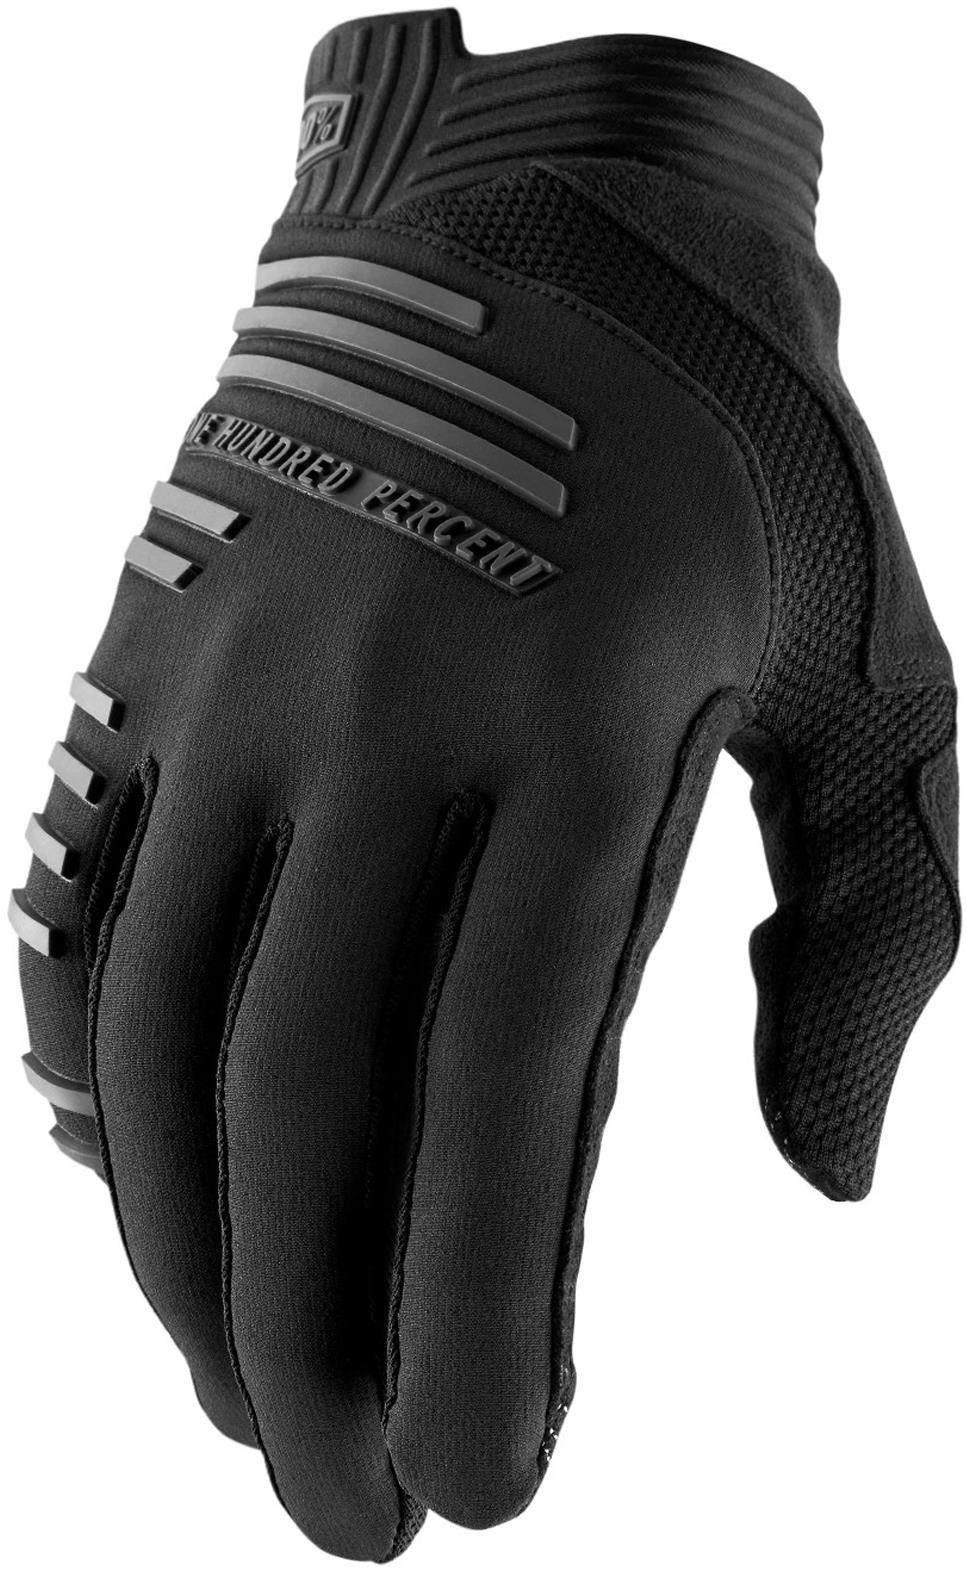 R-Core Long Finger MTB Cycling Gloves image 0